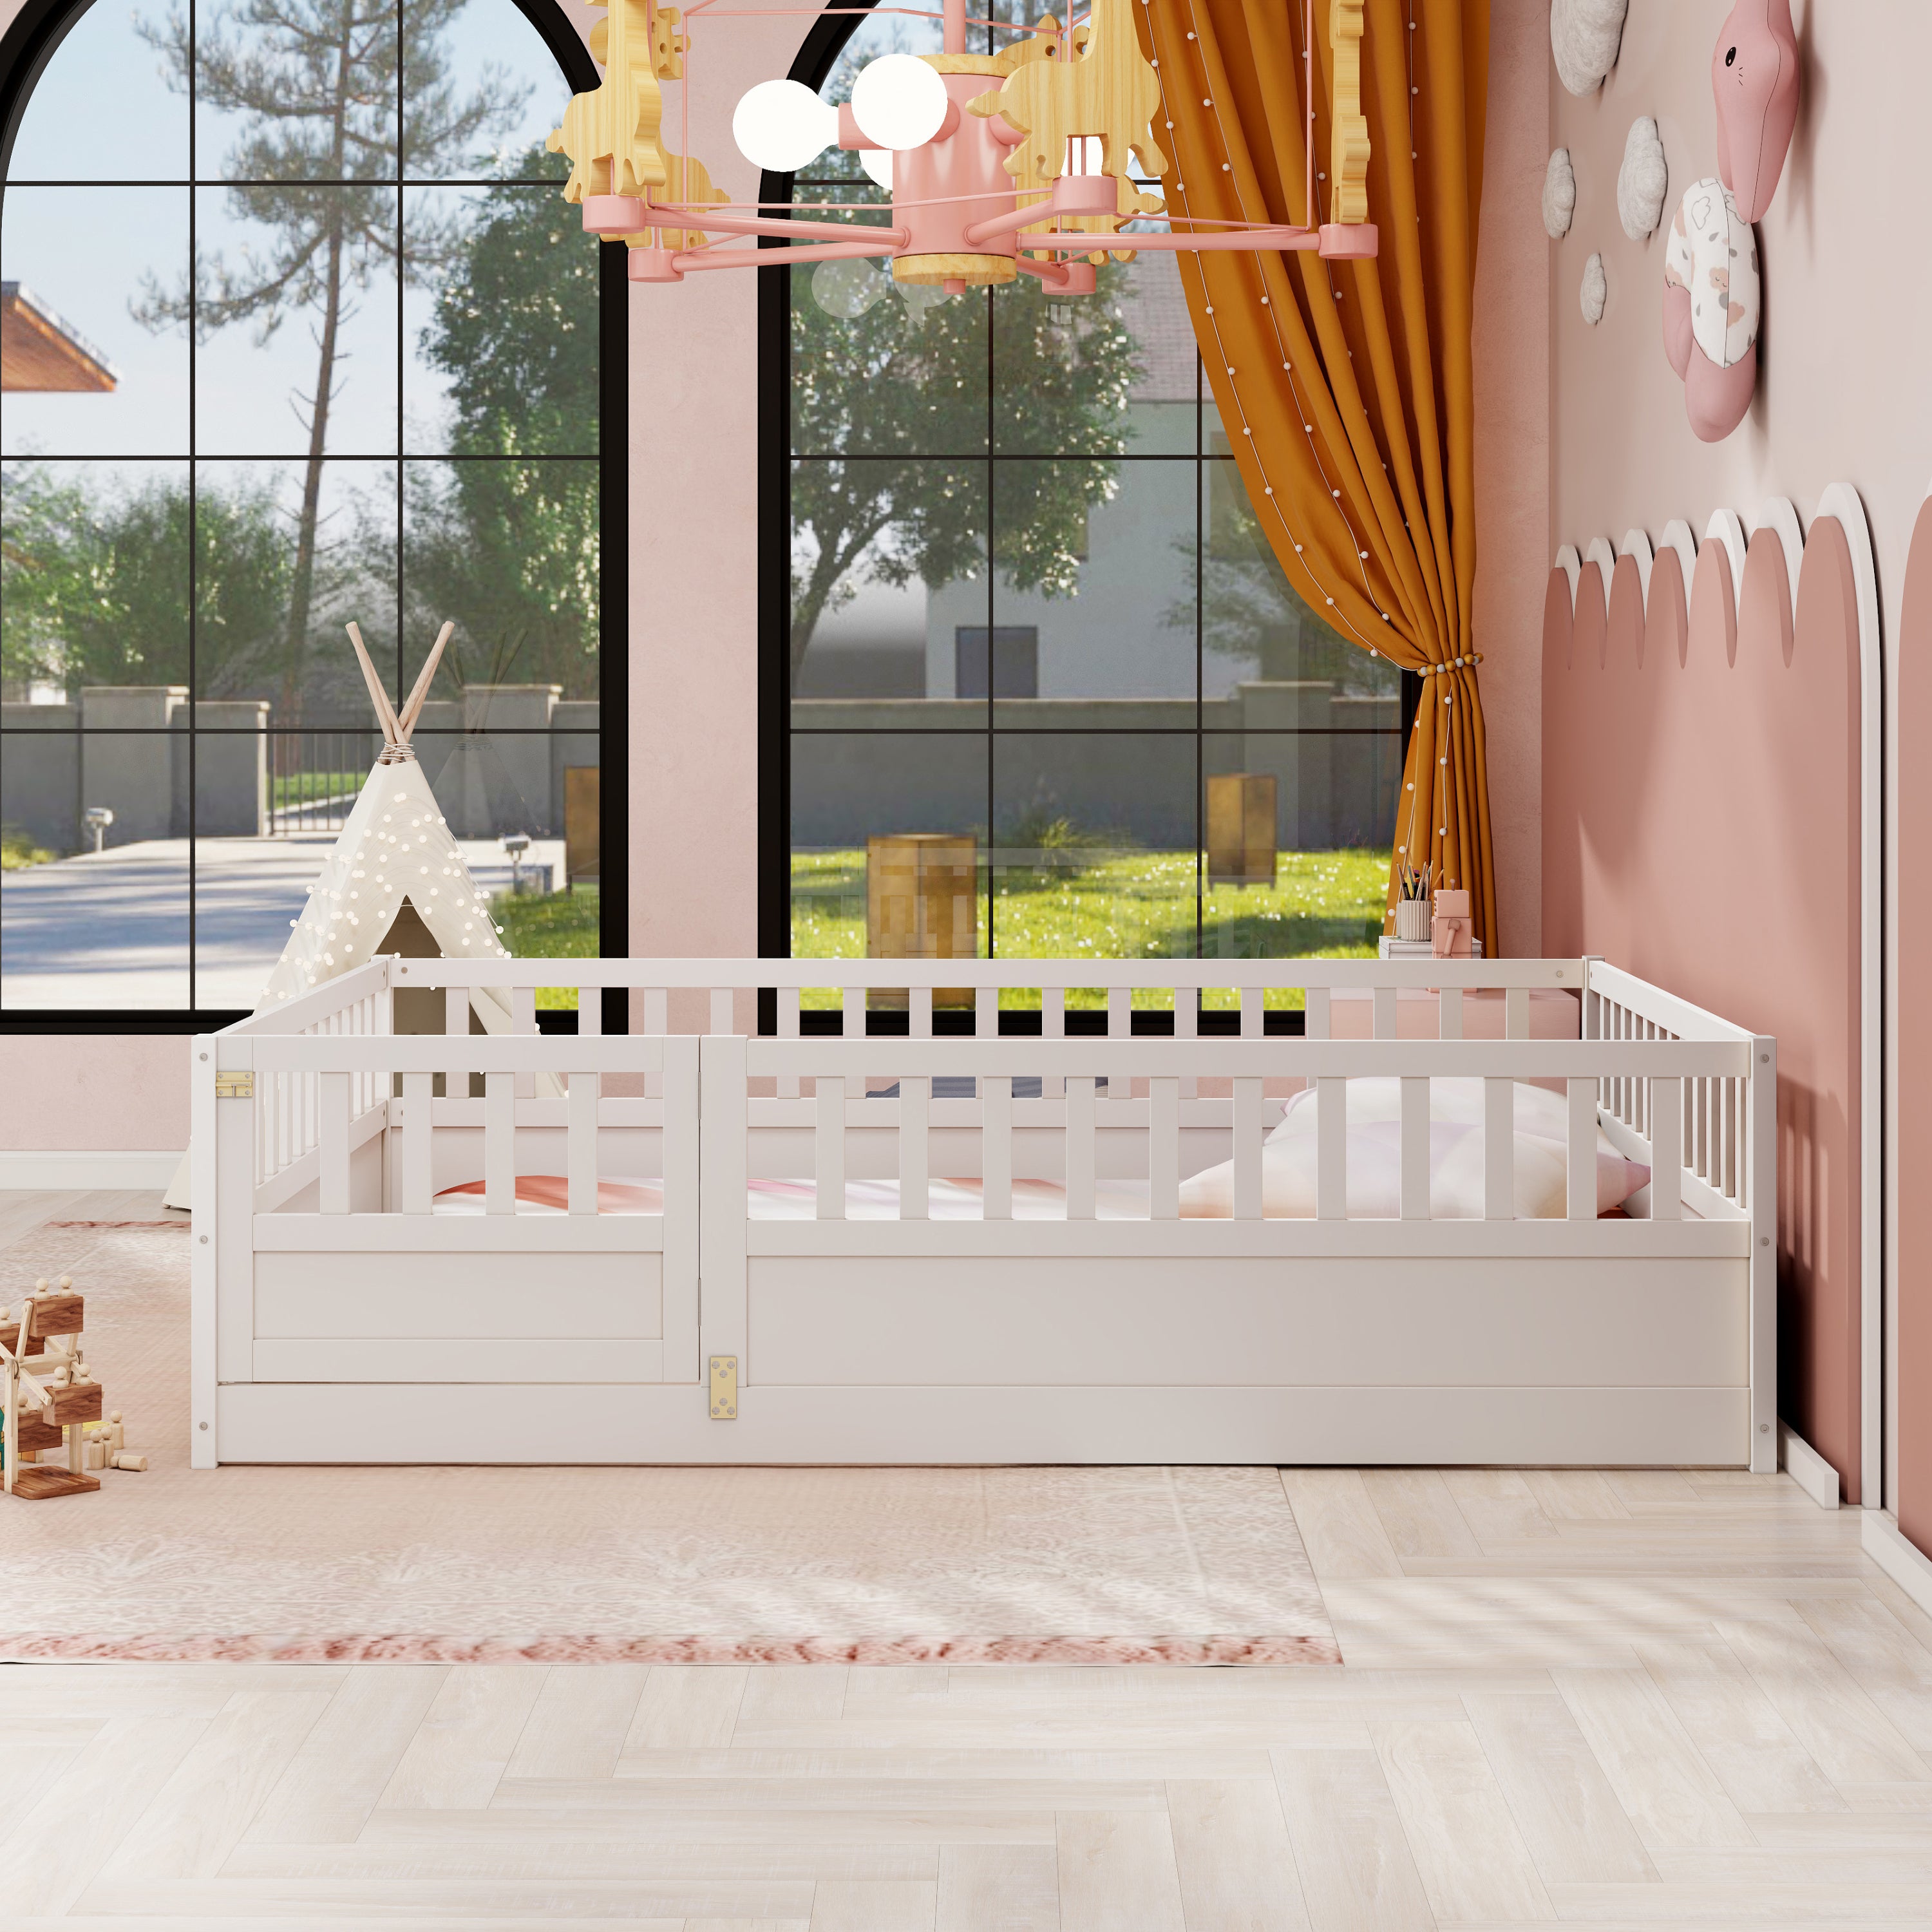 Full size  Floor bed, integral construction with super high security barrier, door, children's floor bed frame, Montessori wooden children's floor bed, white